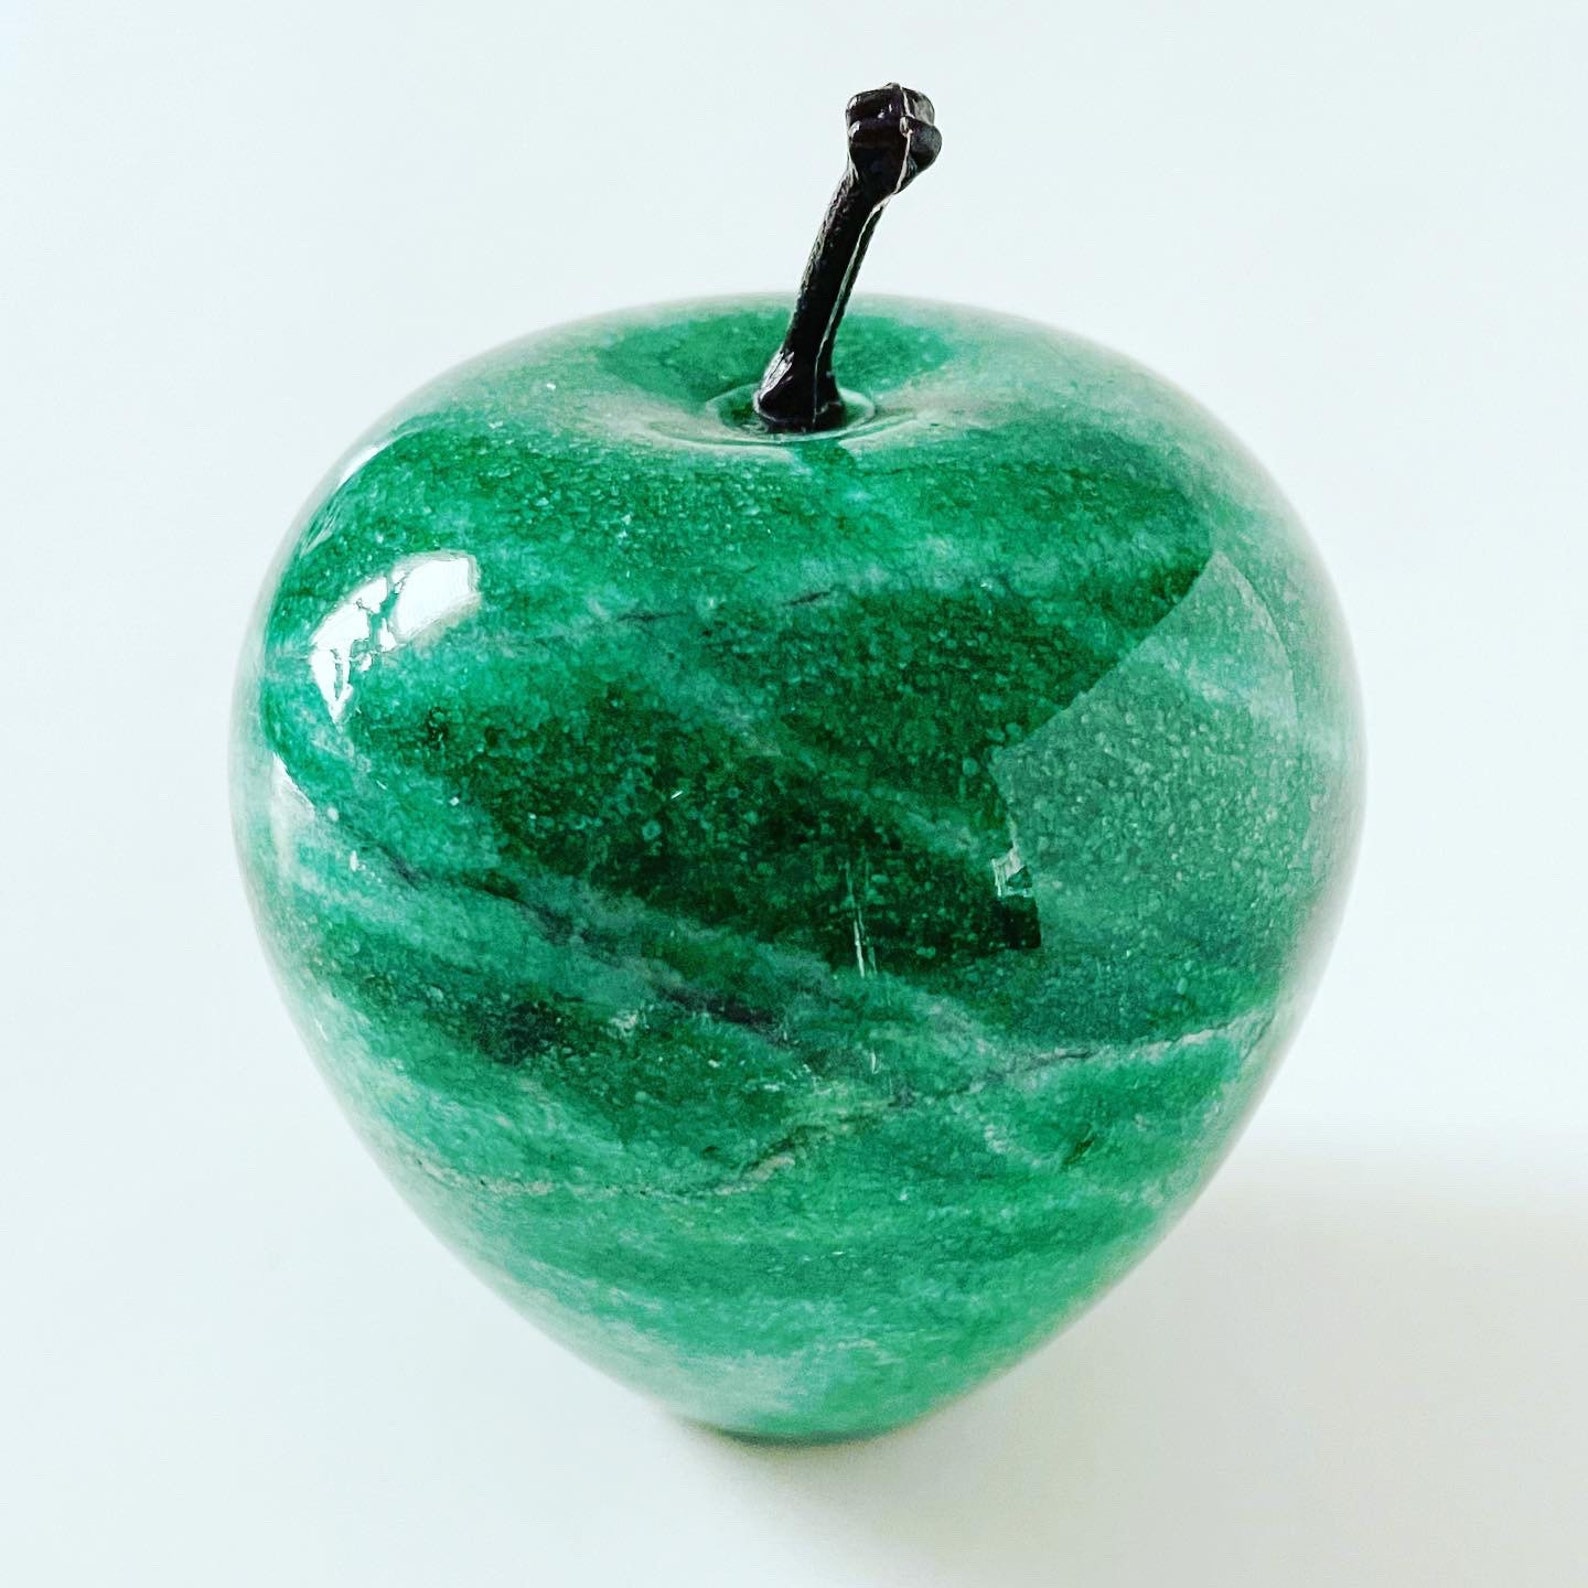 Life-size Solid Green Marble Apple Paperweight - Etsy